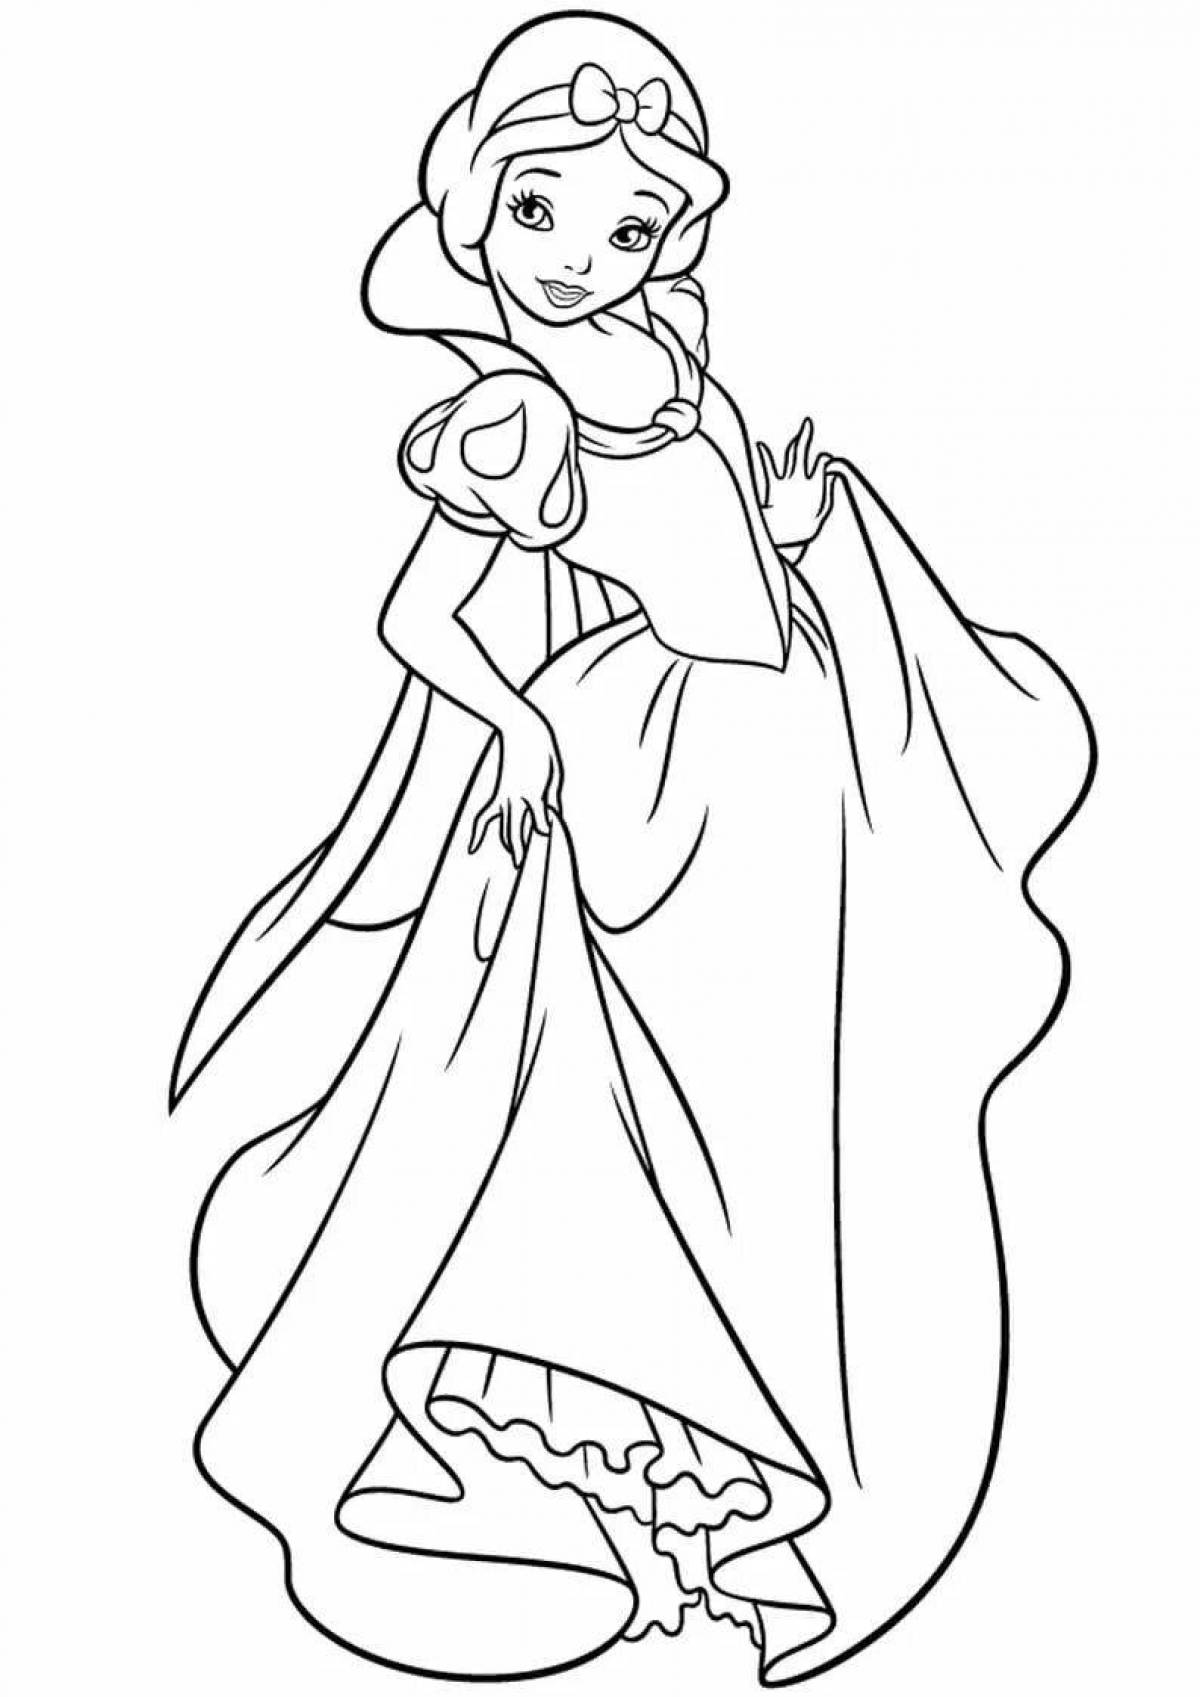 Exquisite princess coloring pages